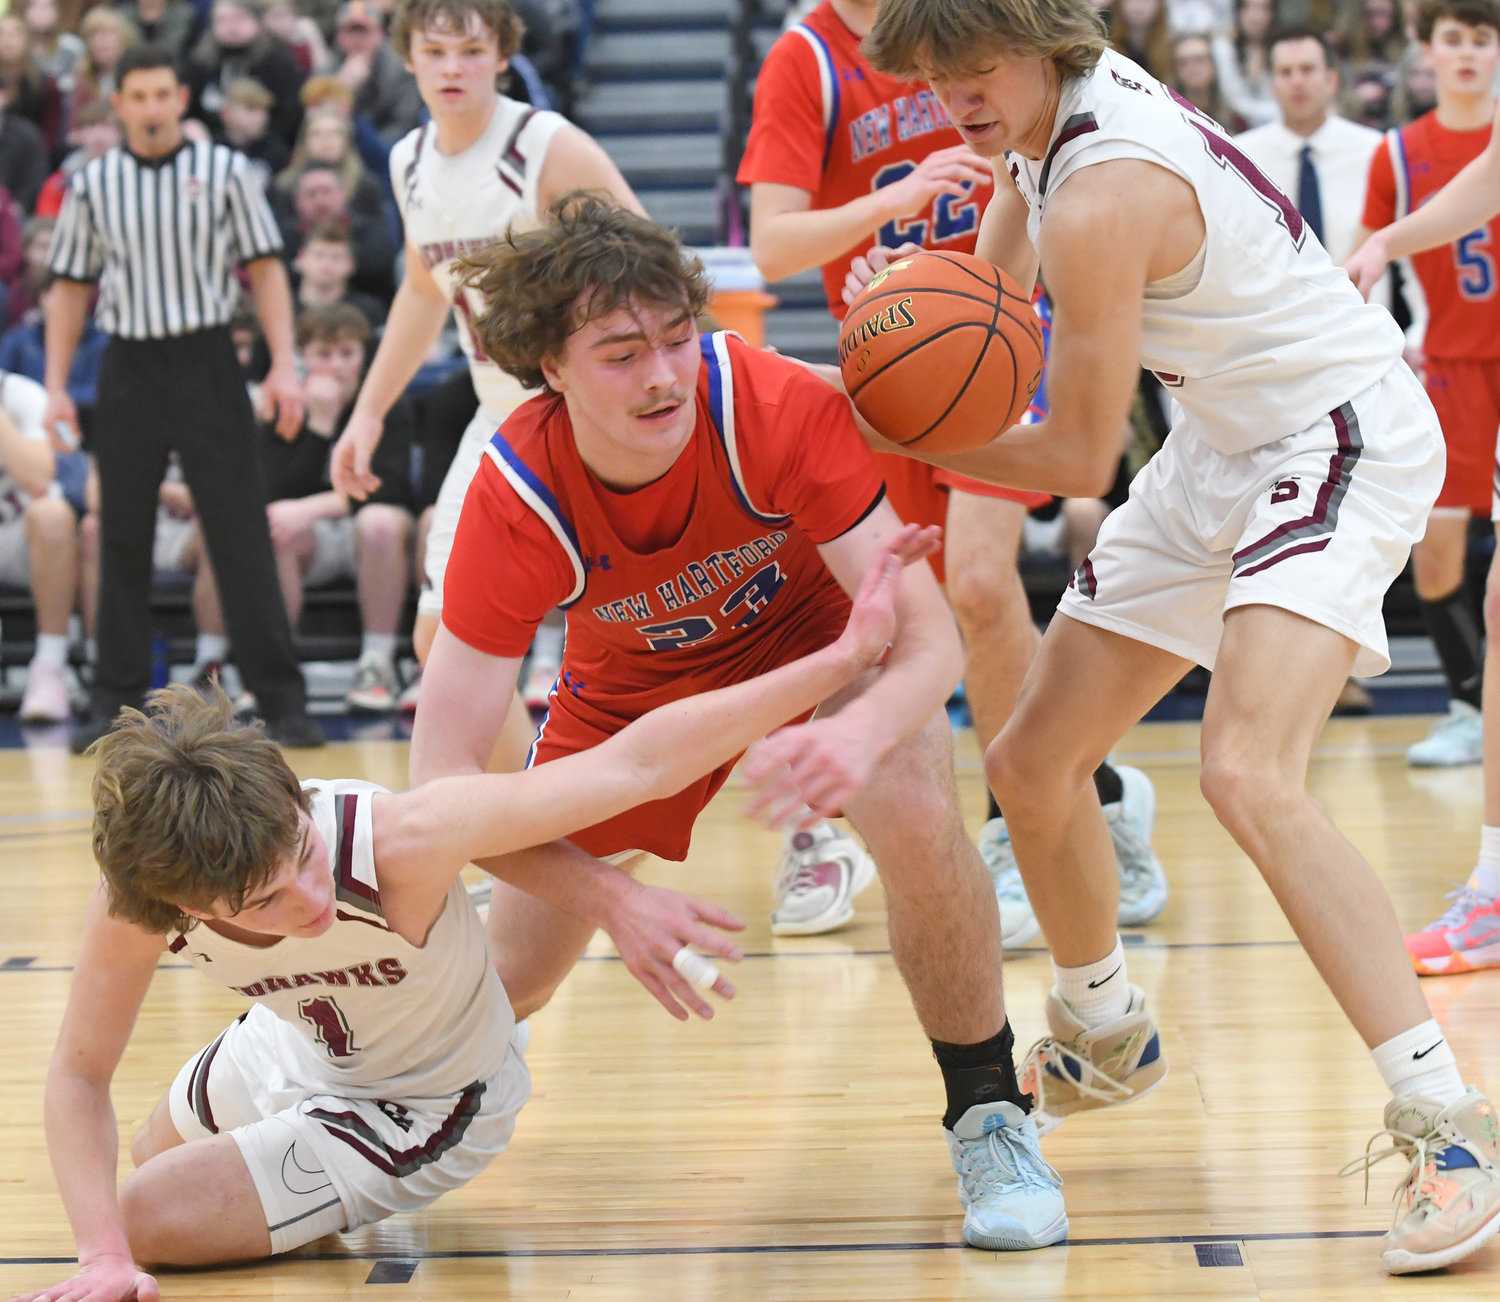 Central Square's Colin Kees and Tyler Meigel tie up New Hartford's Zach Philipkoski in the first half at SRC Arena in Syracuse. Philipkoski had 24 points in New Hartford's 65-60 win.